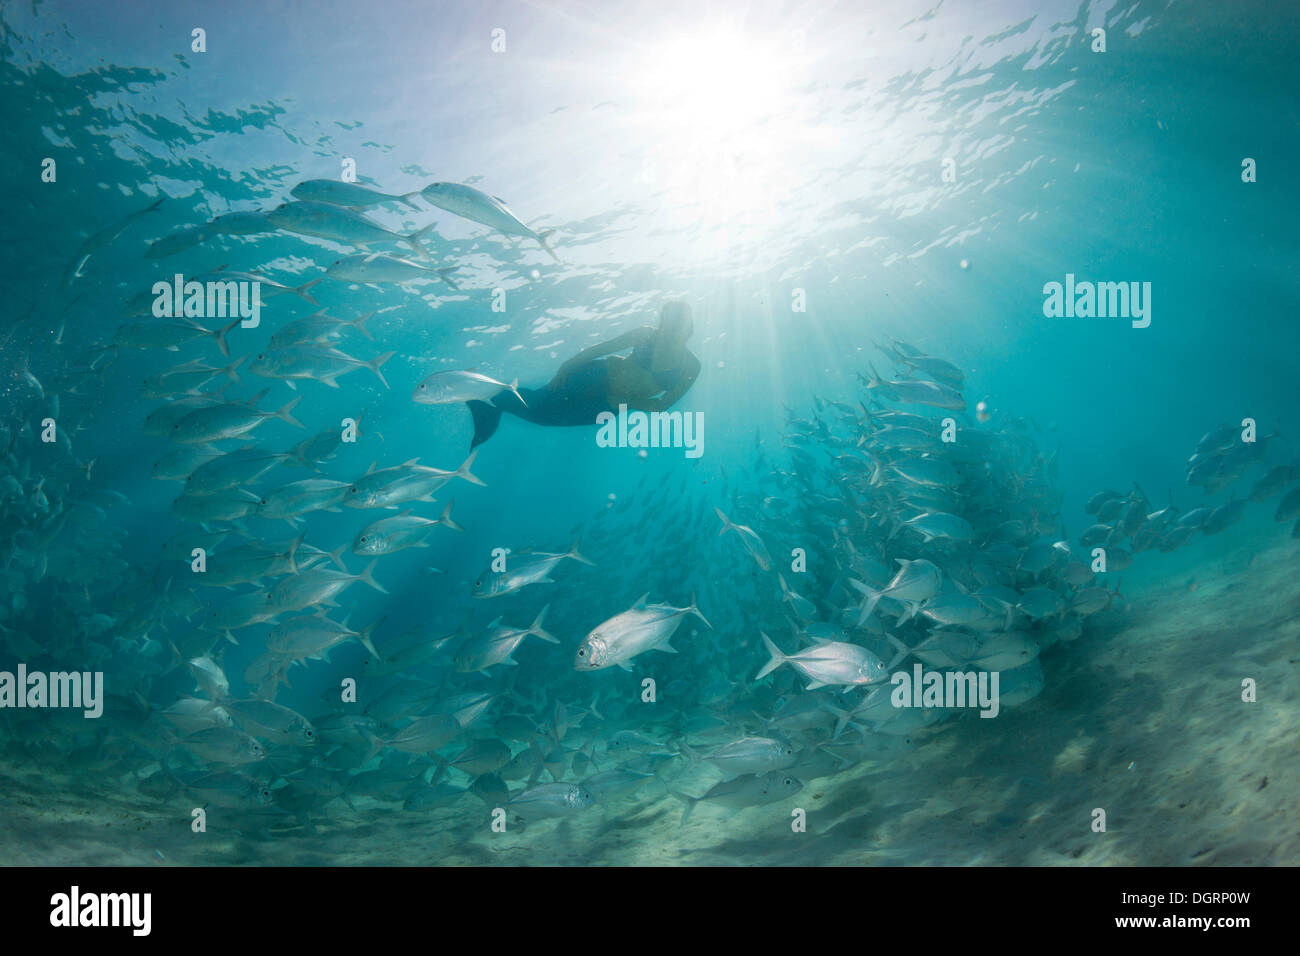 Women snorkling dressed as a mermaid in a school of Bigeye Trevally (Caranx sexfasciatus) in a lagoon, Philippines, Asia Stock Photo